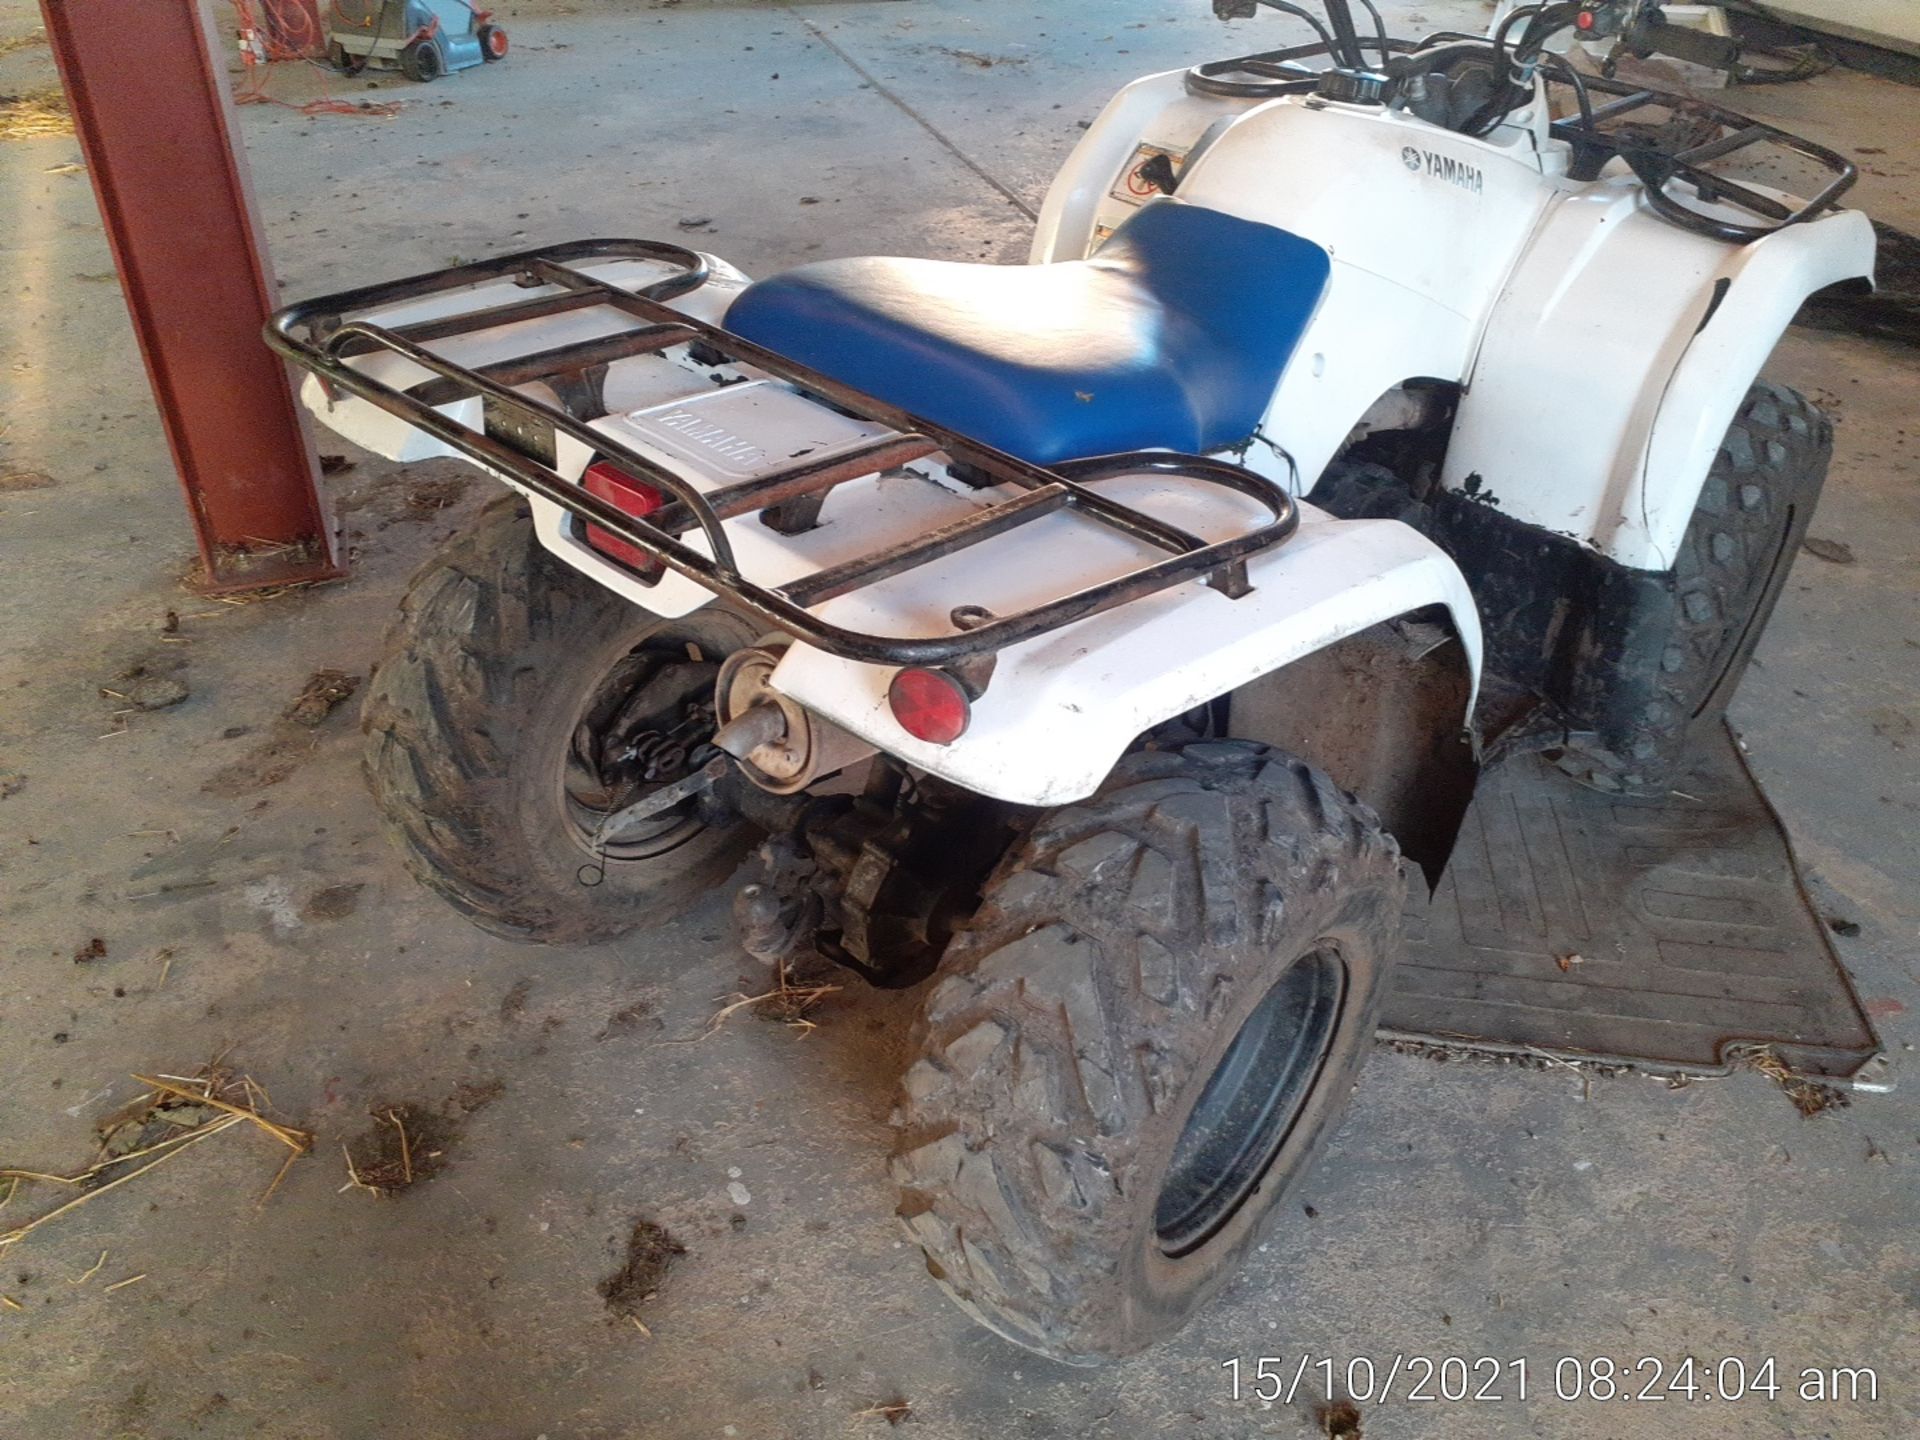 YAMAHA GRIZZLY 350 FARM QUAD BIKE, STARTS AND DRIVES WELL, AUTOMATIC *NO VAT* - Image 5 of 8